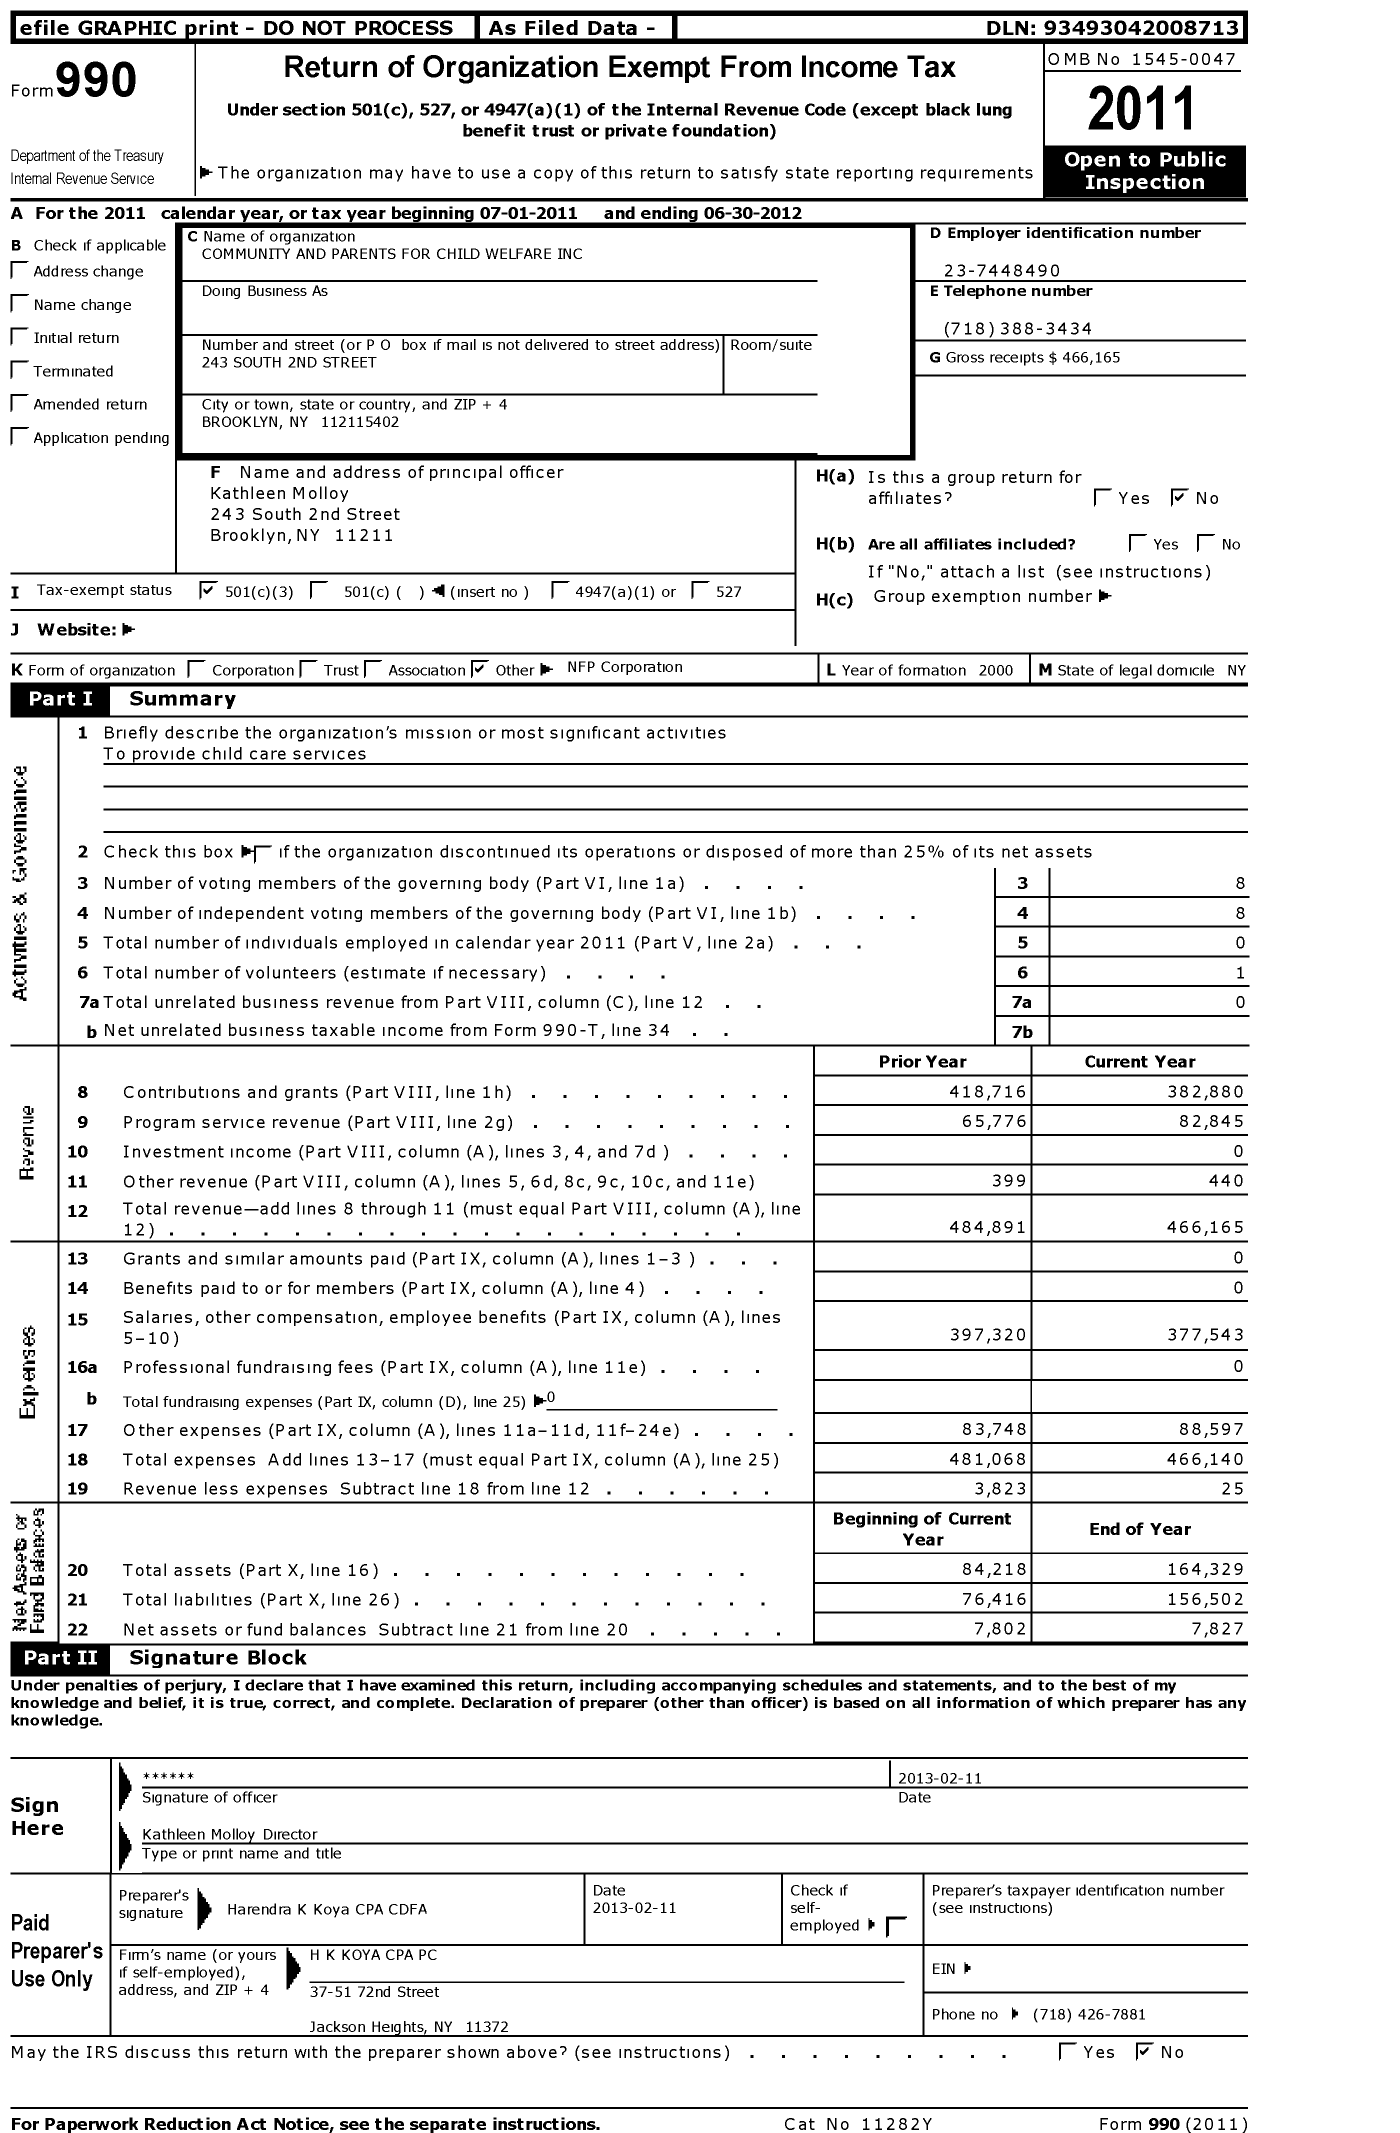 Image of first page of 2011 Form 990 for Community and Parents for Child Welfare